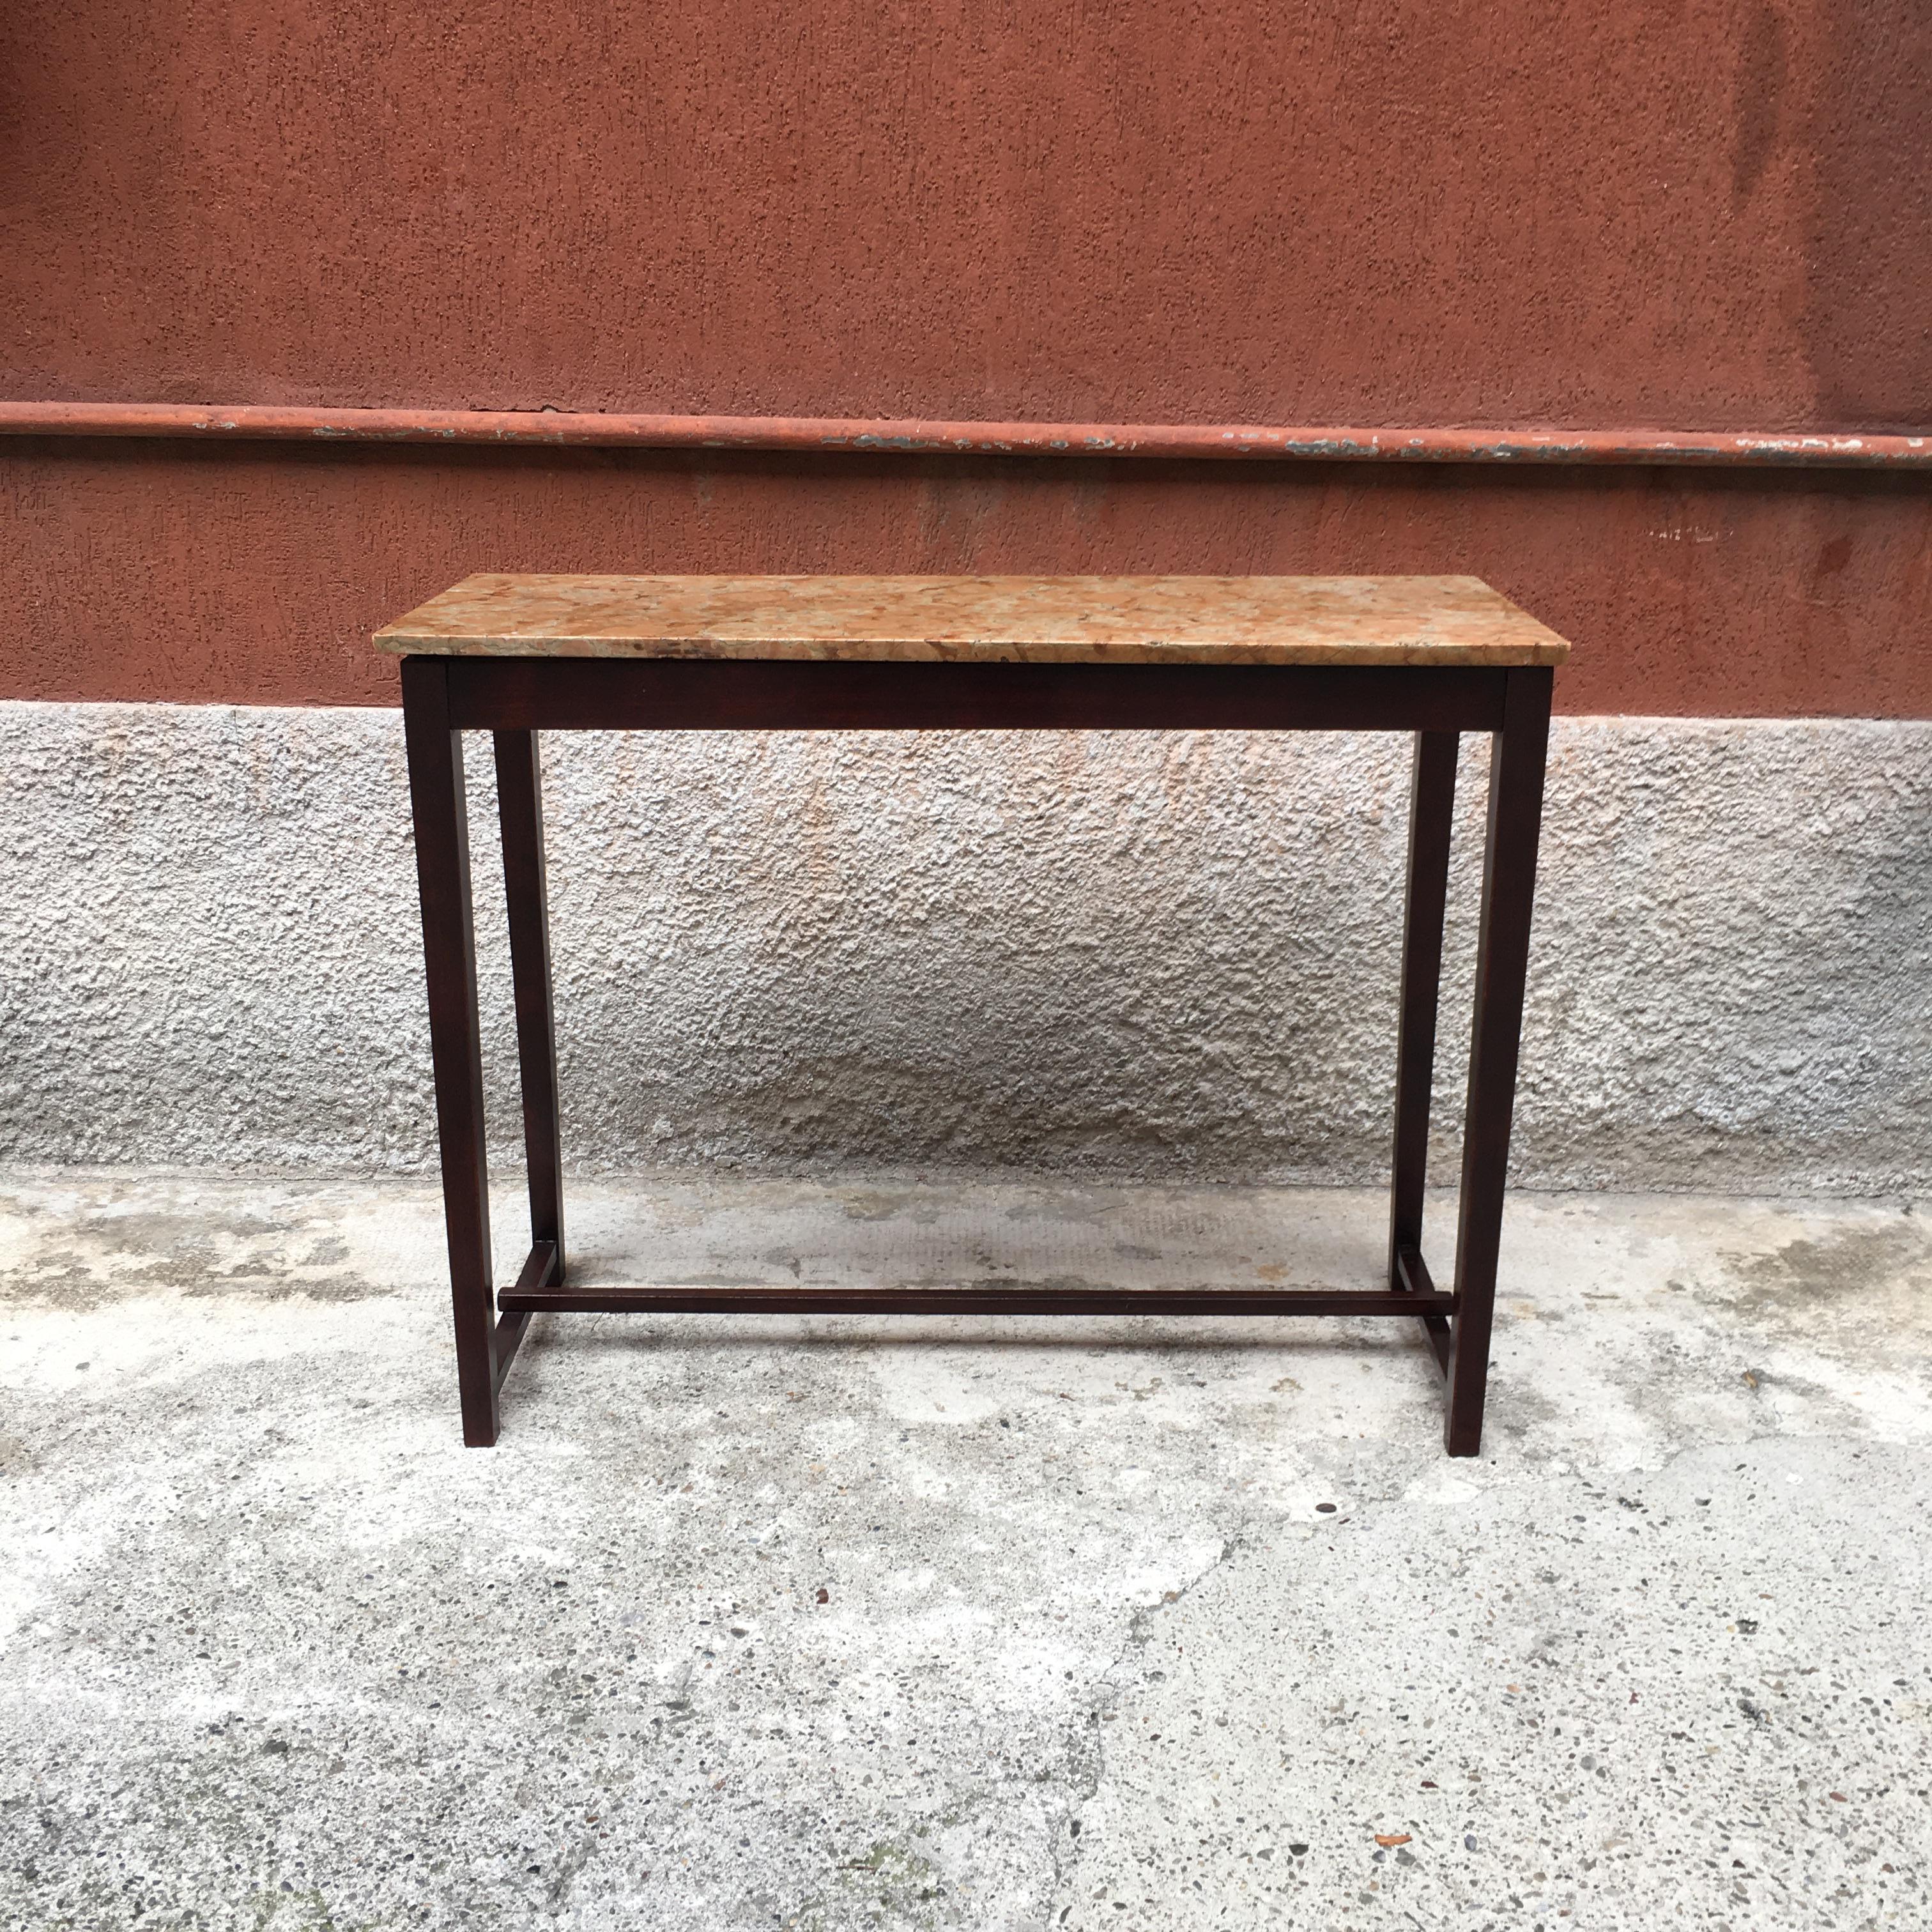 Italian mid-century wood and marble console, 1950s
Italian console with dark solid wood frame and marble top

Entirely restored with only one defect on the marble

103x40x80h cm